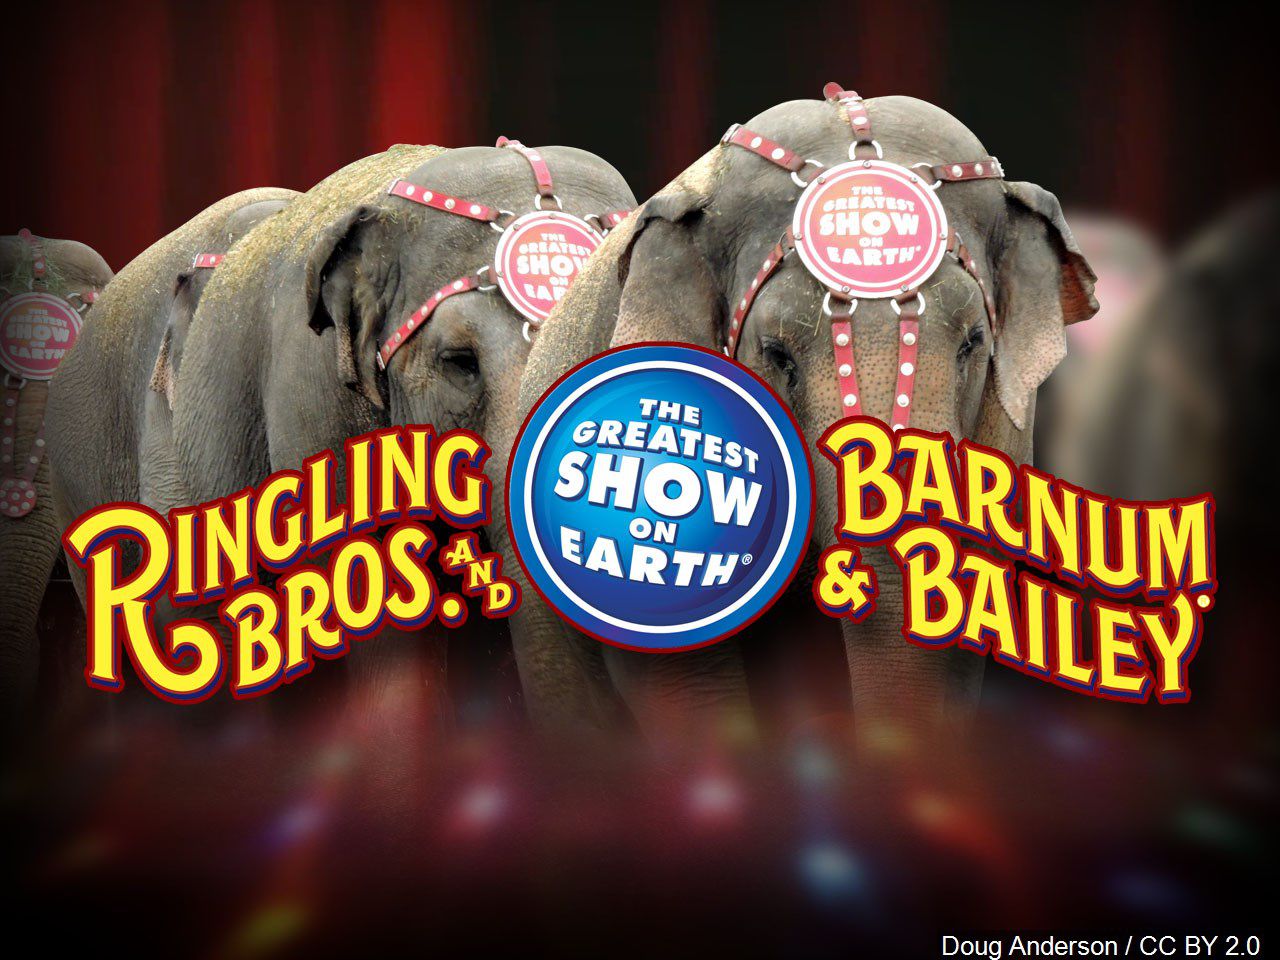 The Greatest Show on Earth' to close after 146 years